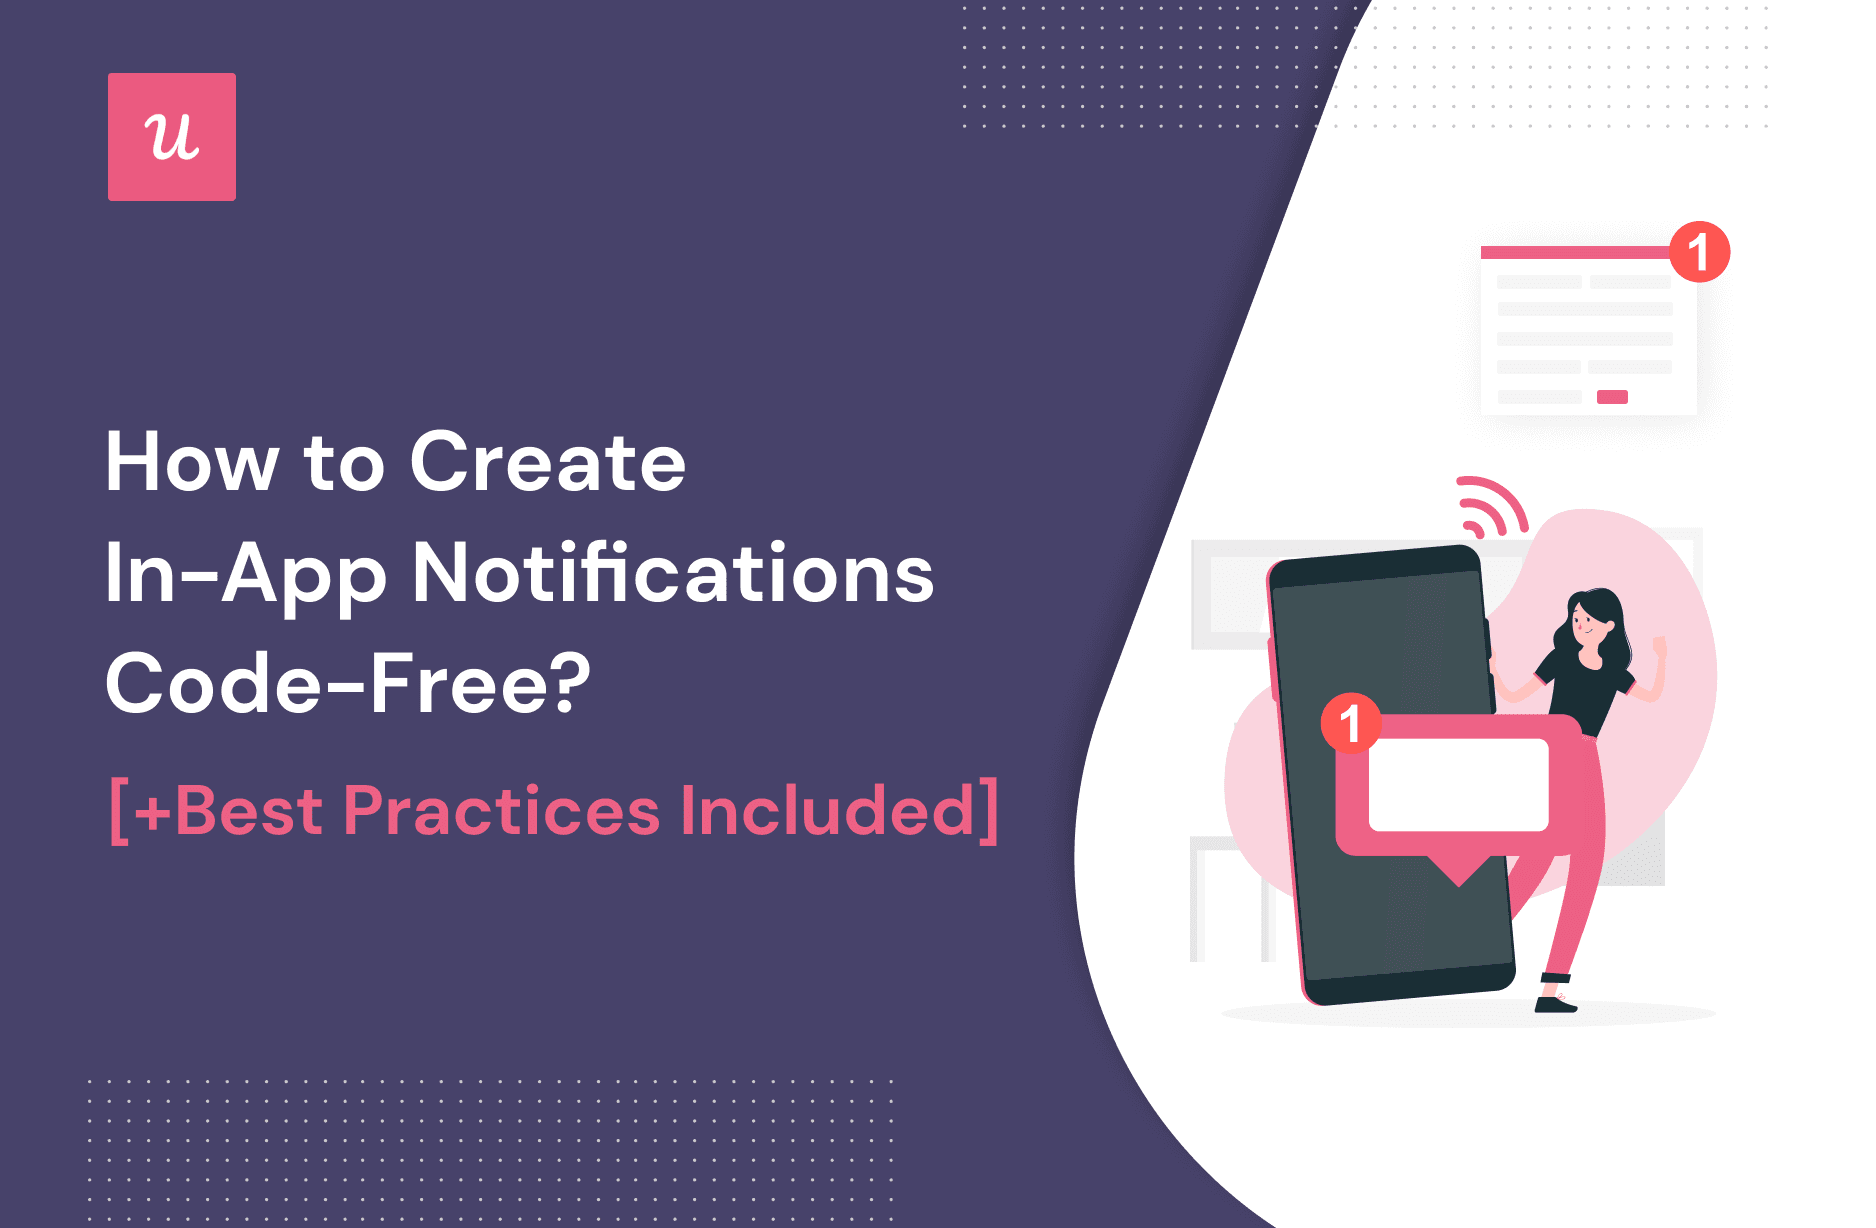 How To Create In-App Notifications Code-Free? [+Best Practices Included]